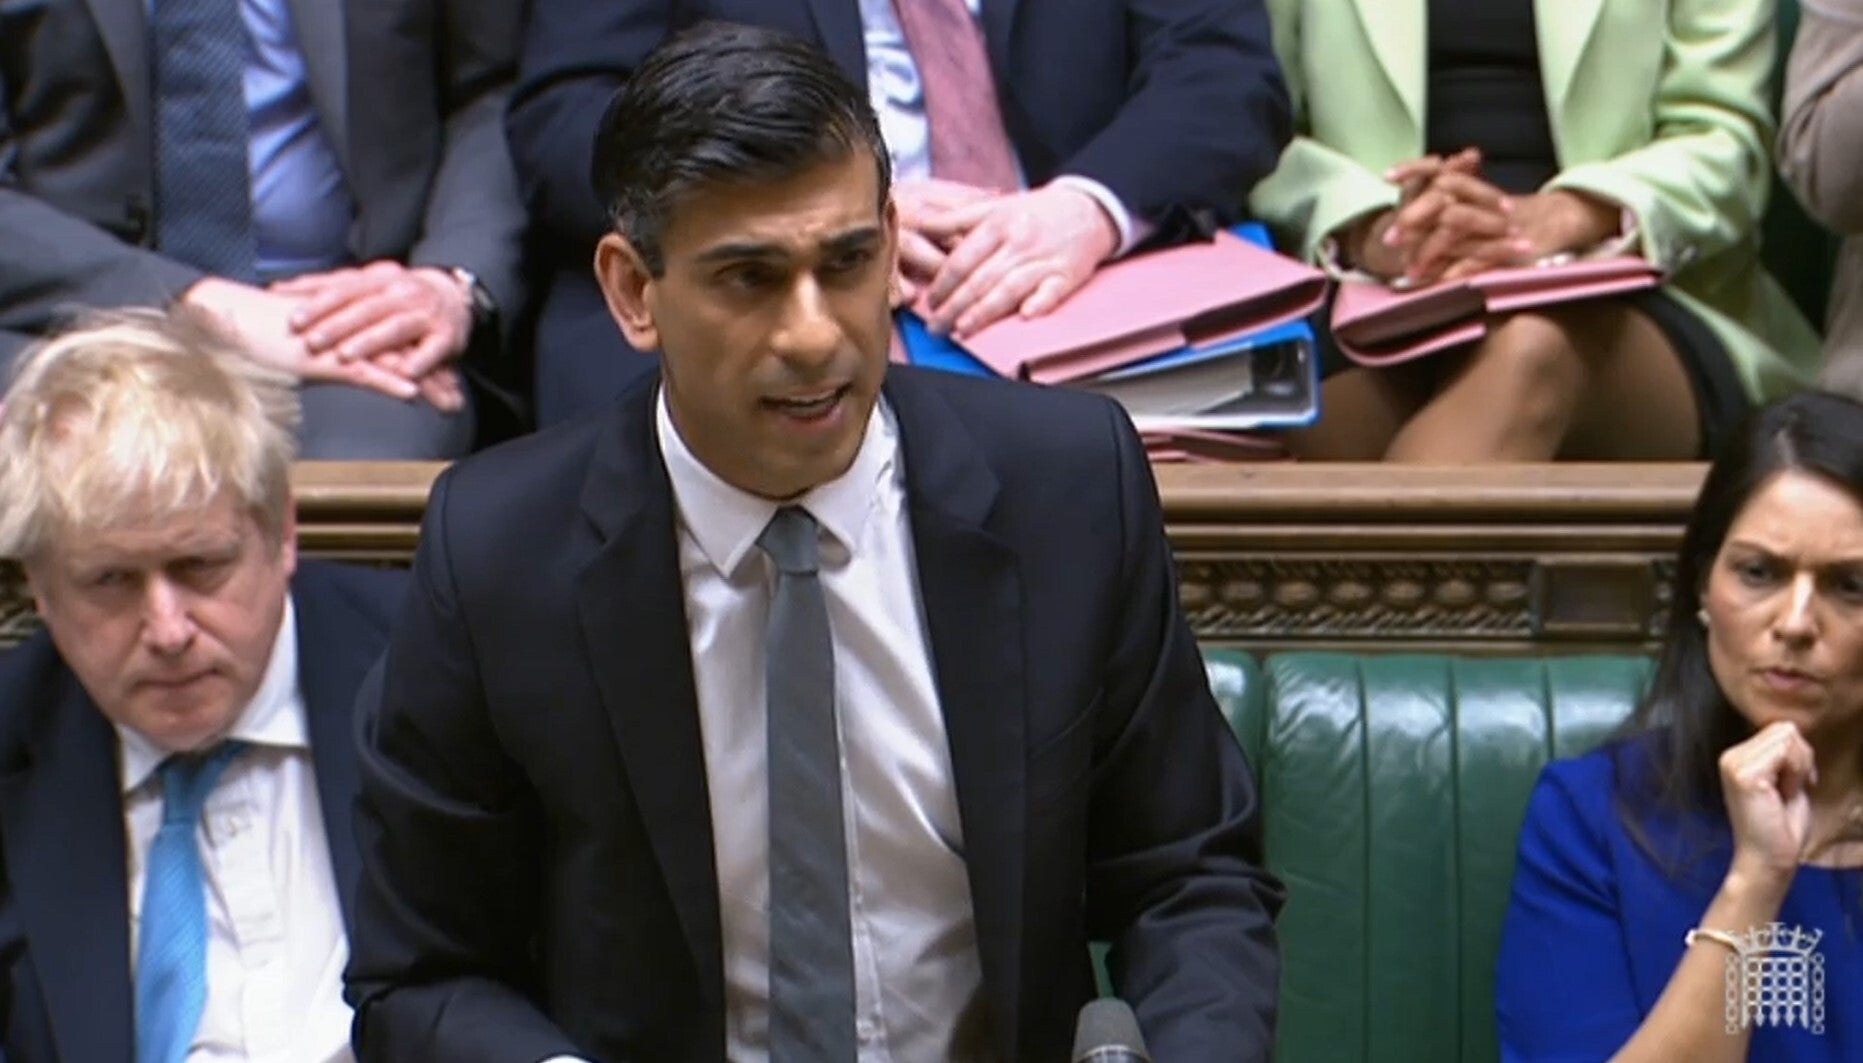 Chancellor Rishi Sunak speaking in the House of Commons (House of Commons/PA)